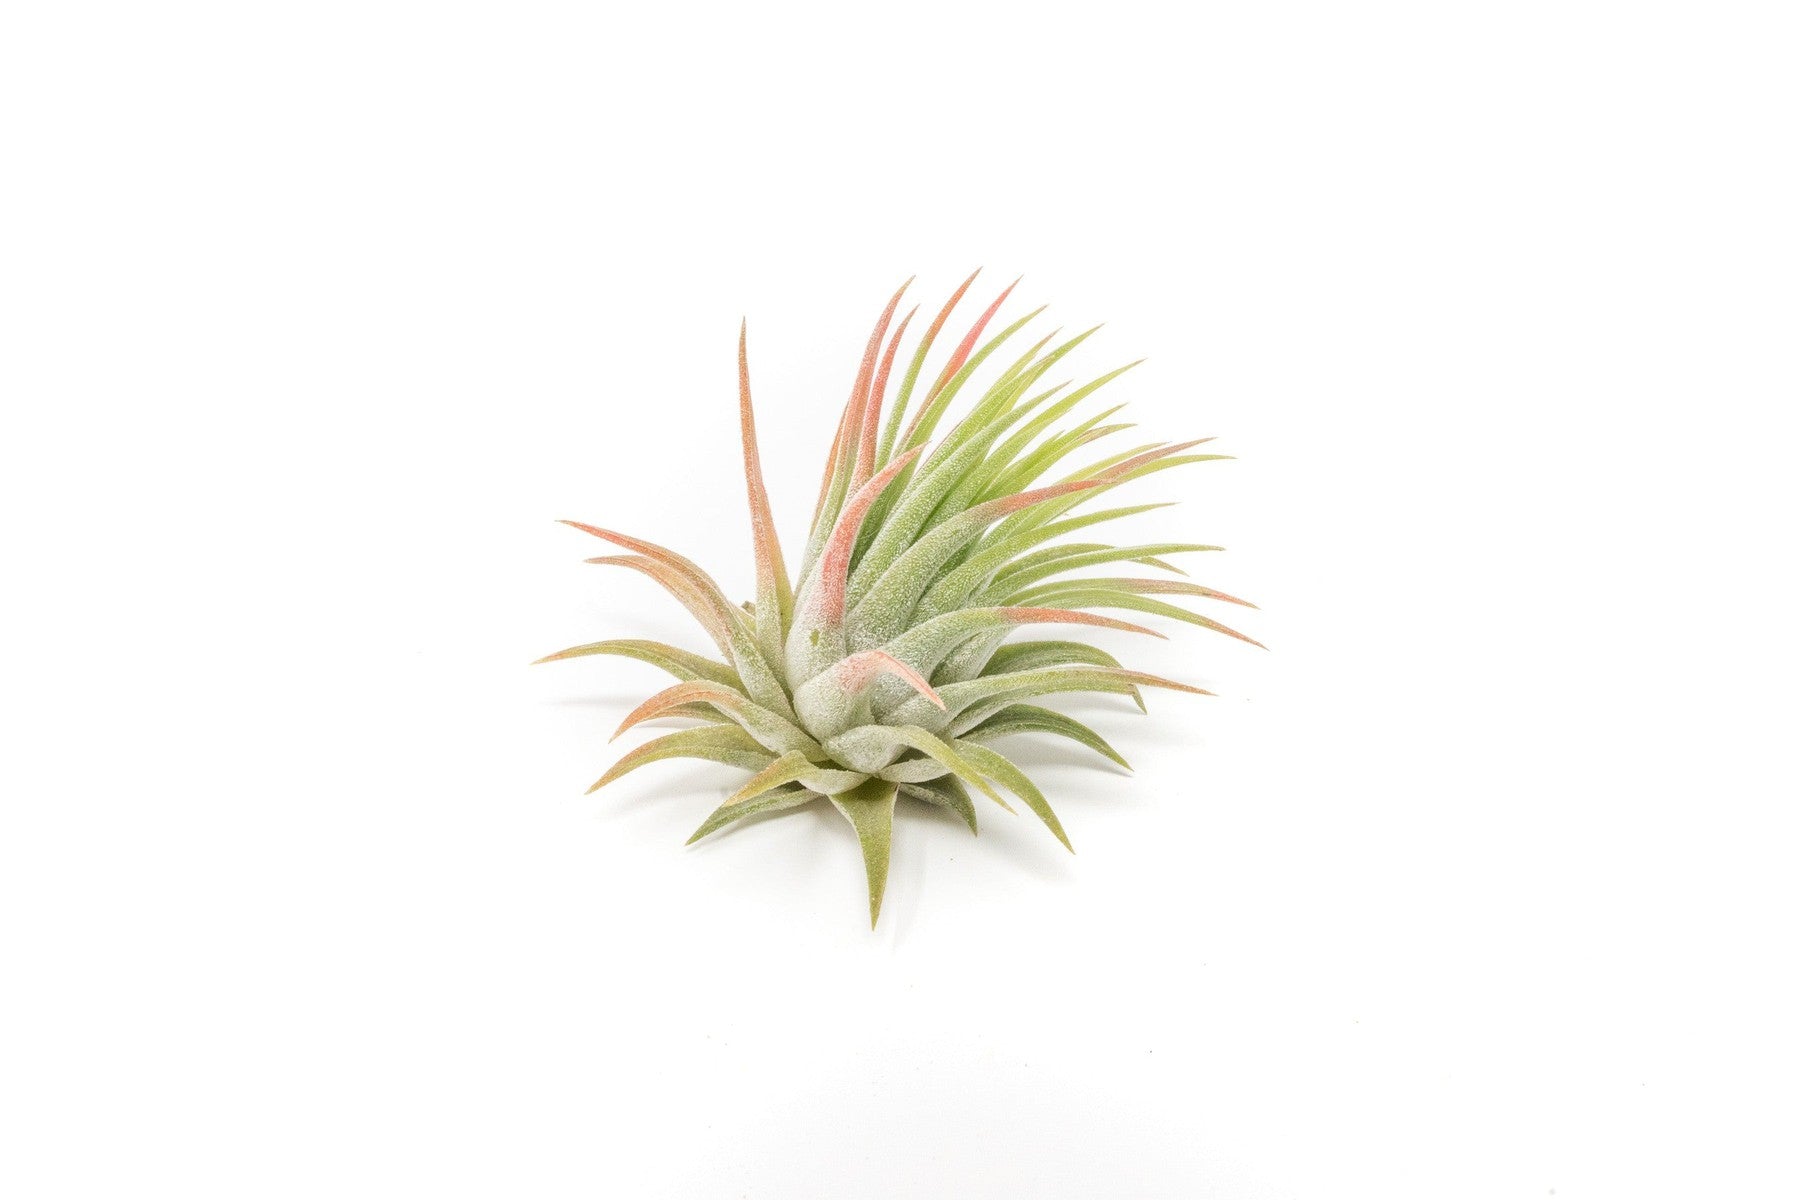 SALE - Tillandsia Ionantha Rubra Air Plants - Set of 10 or 20 - 40% Off-airplant-The Succulent Source